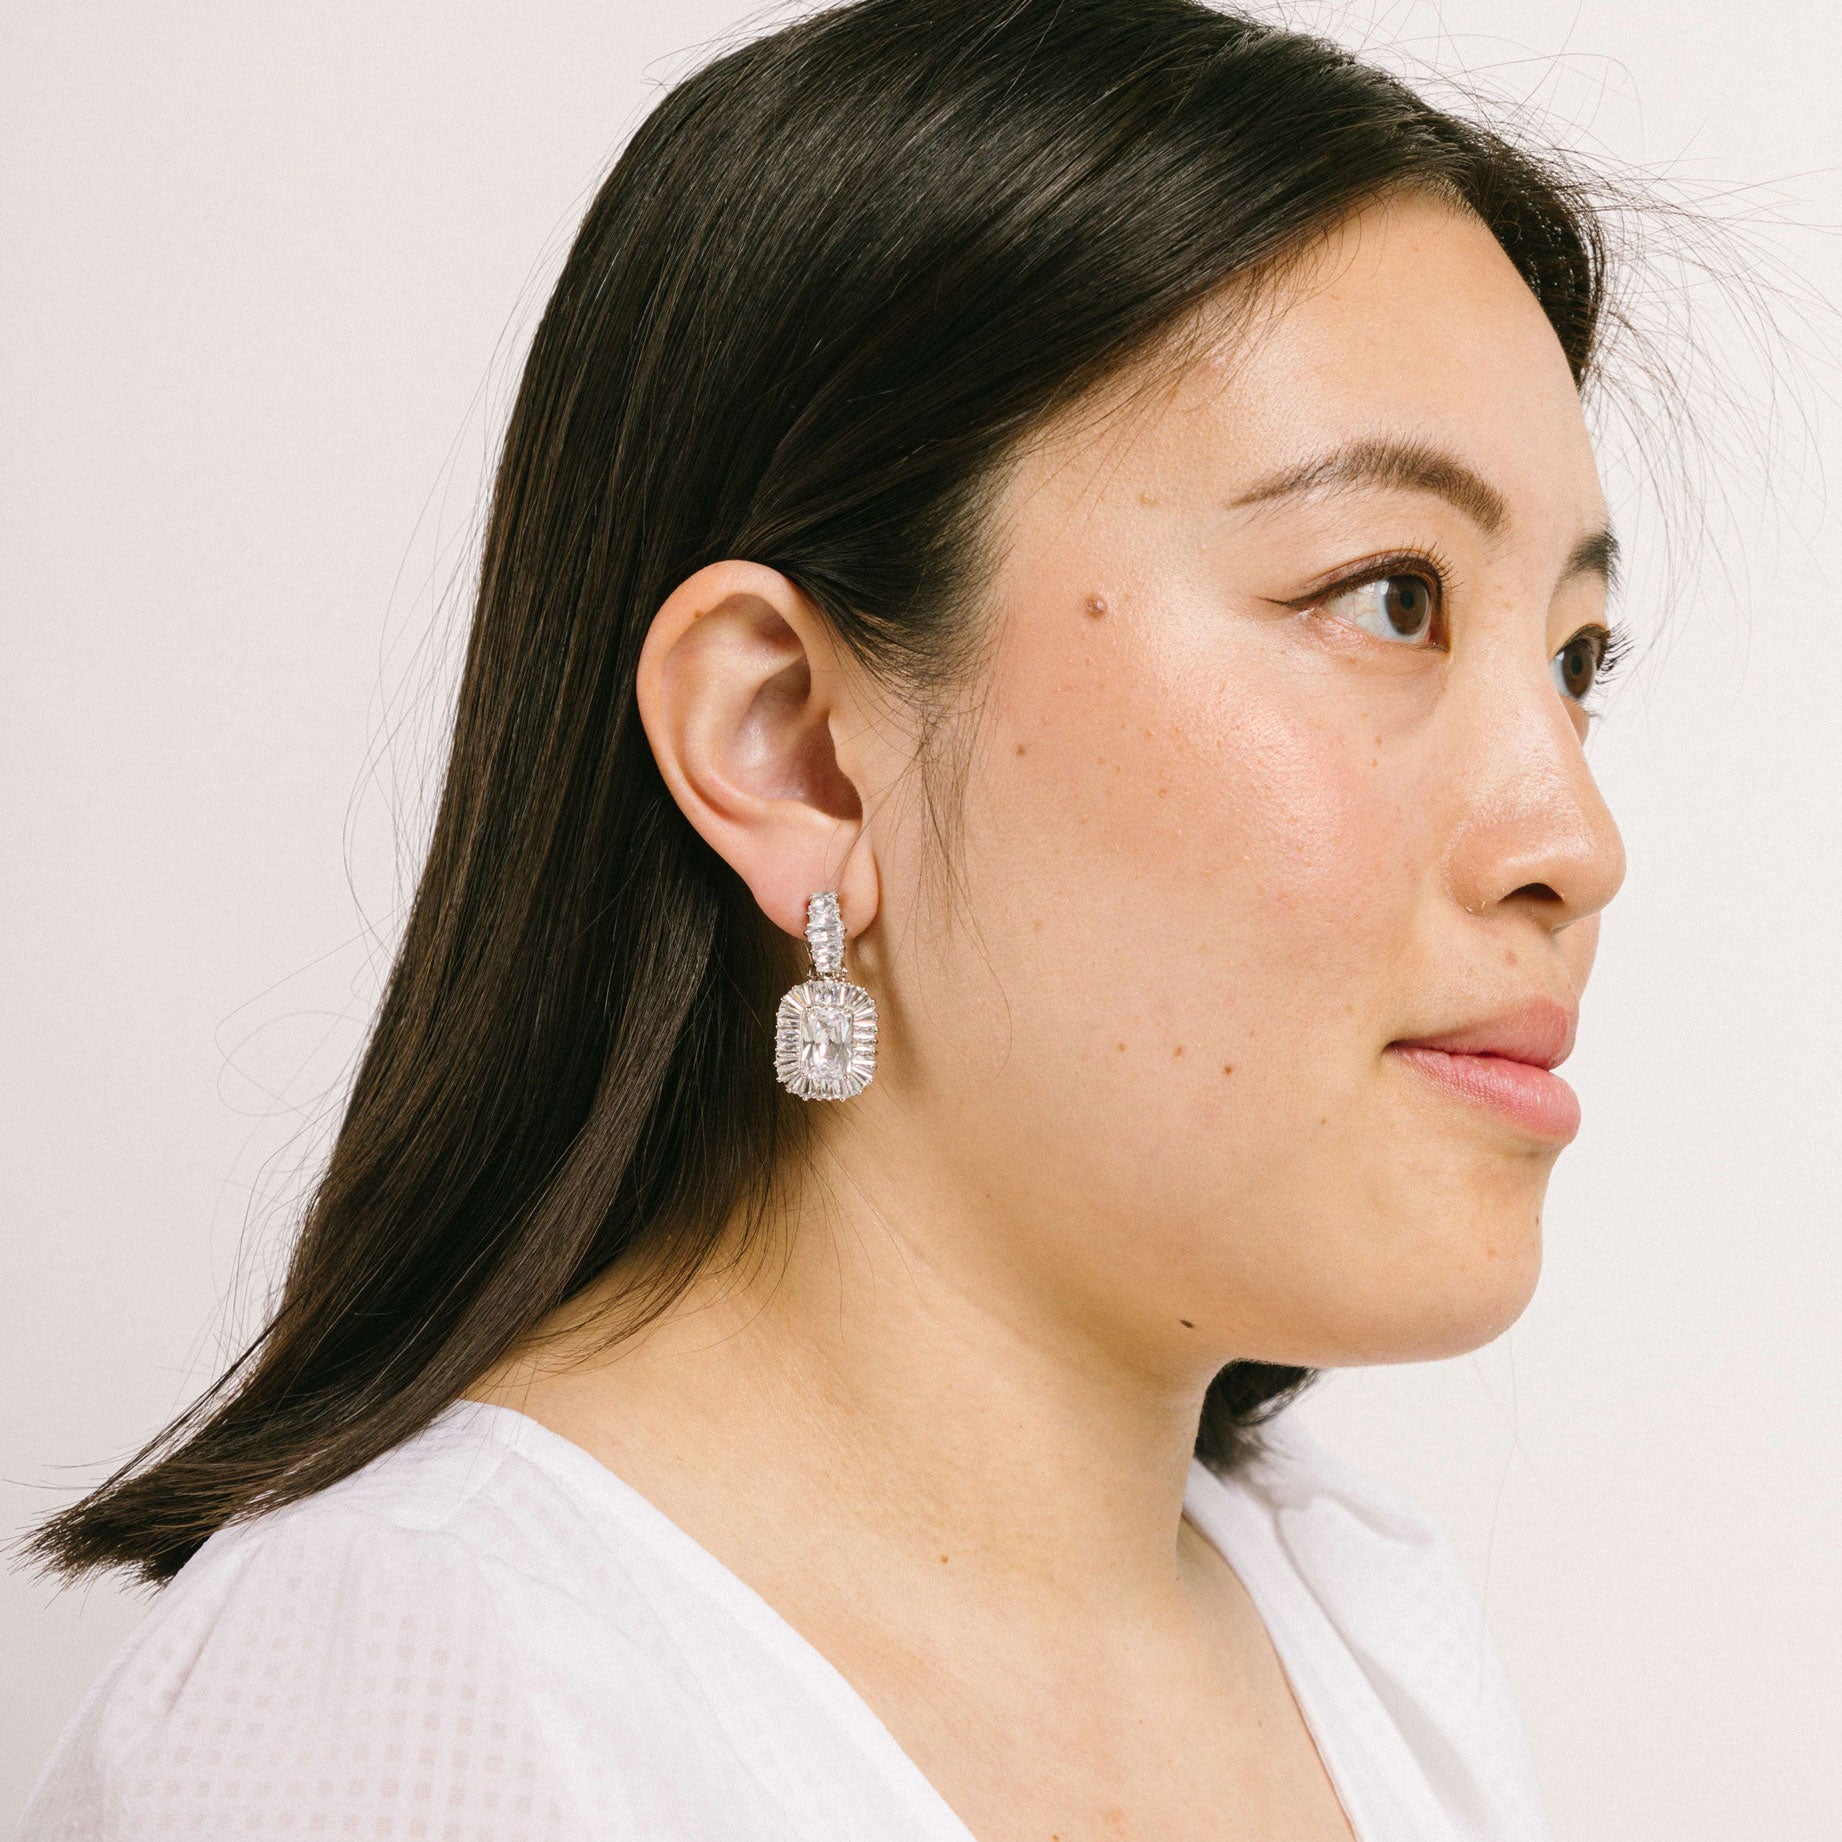 A model wearing the Quinn Clip On Earrings feature a secure padded clip-on closure, perfect for all types of ears, from thick and large to thin and sensitive. Enjoy hours of comfortable wear, up to 12 hours. Unable to be adjusted, this one pair of earrings are crafted of Silver plated copper alloy with Cubic Zirconia and are Lead/Nickel/Cadmium free. The clip-on feature includes removable rubber padding.